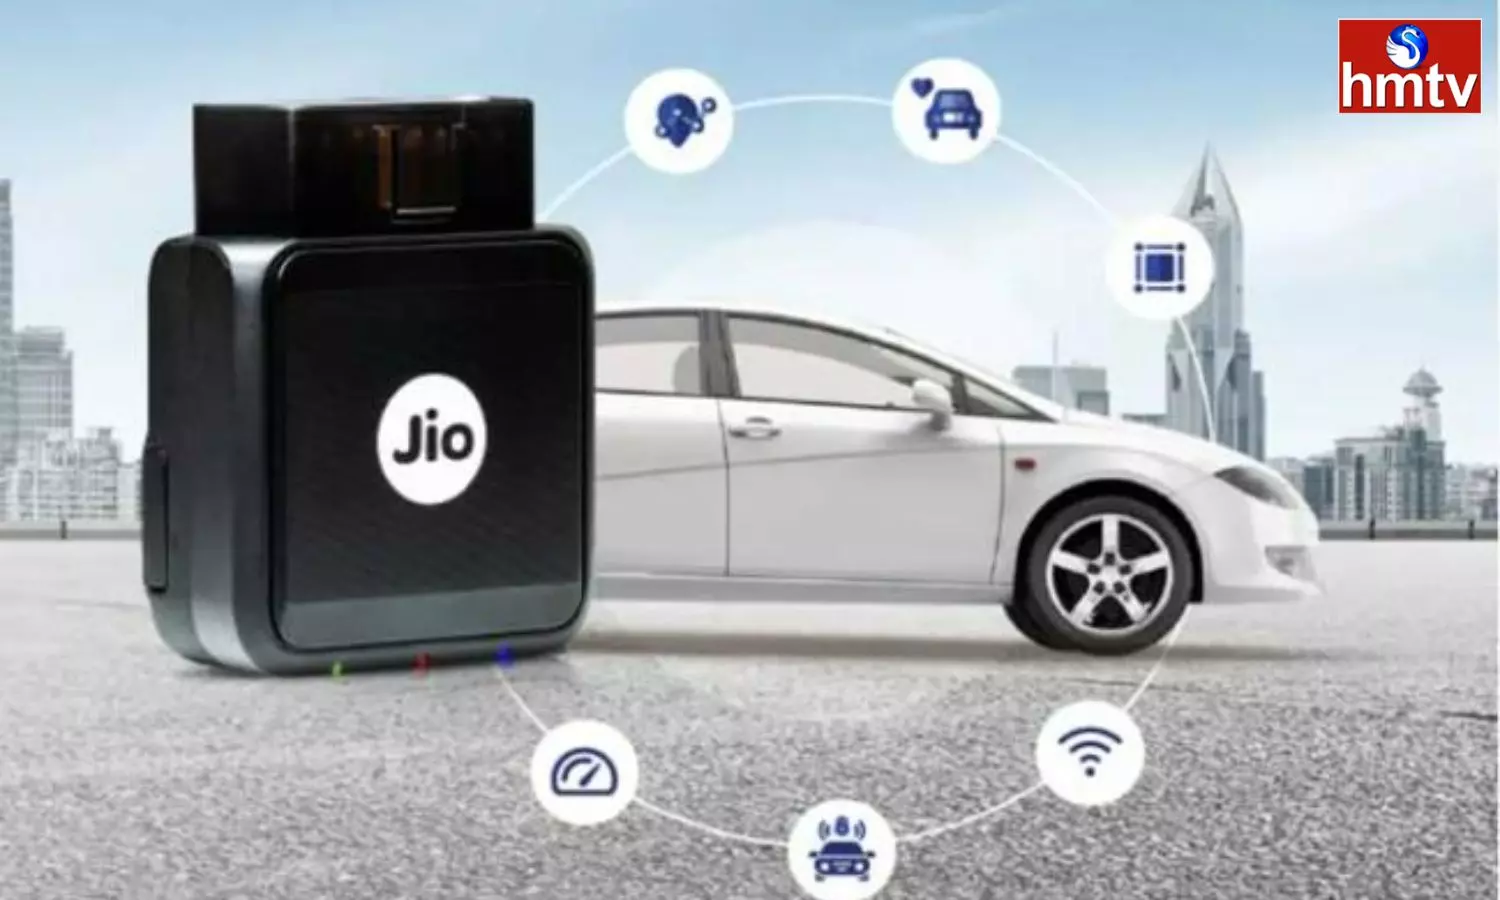 JioMotive Launched for Cars Jio GPS Tracker and Car Theft Alert Device Check Price and Features